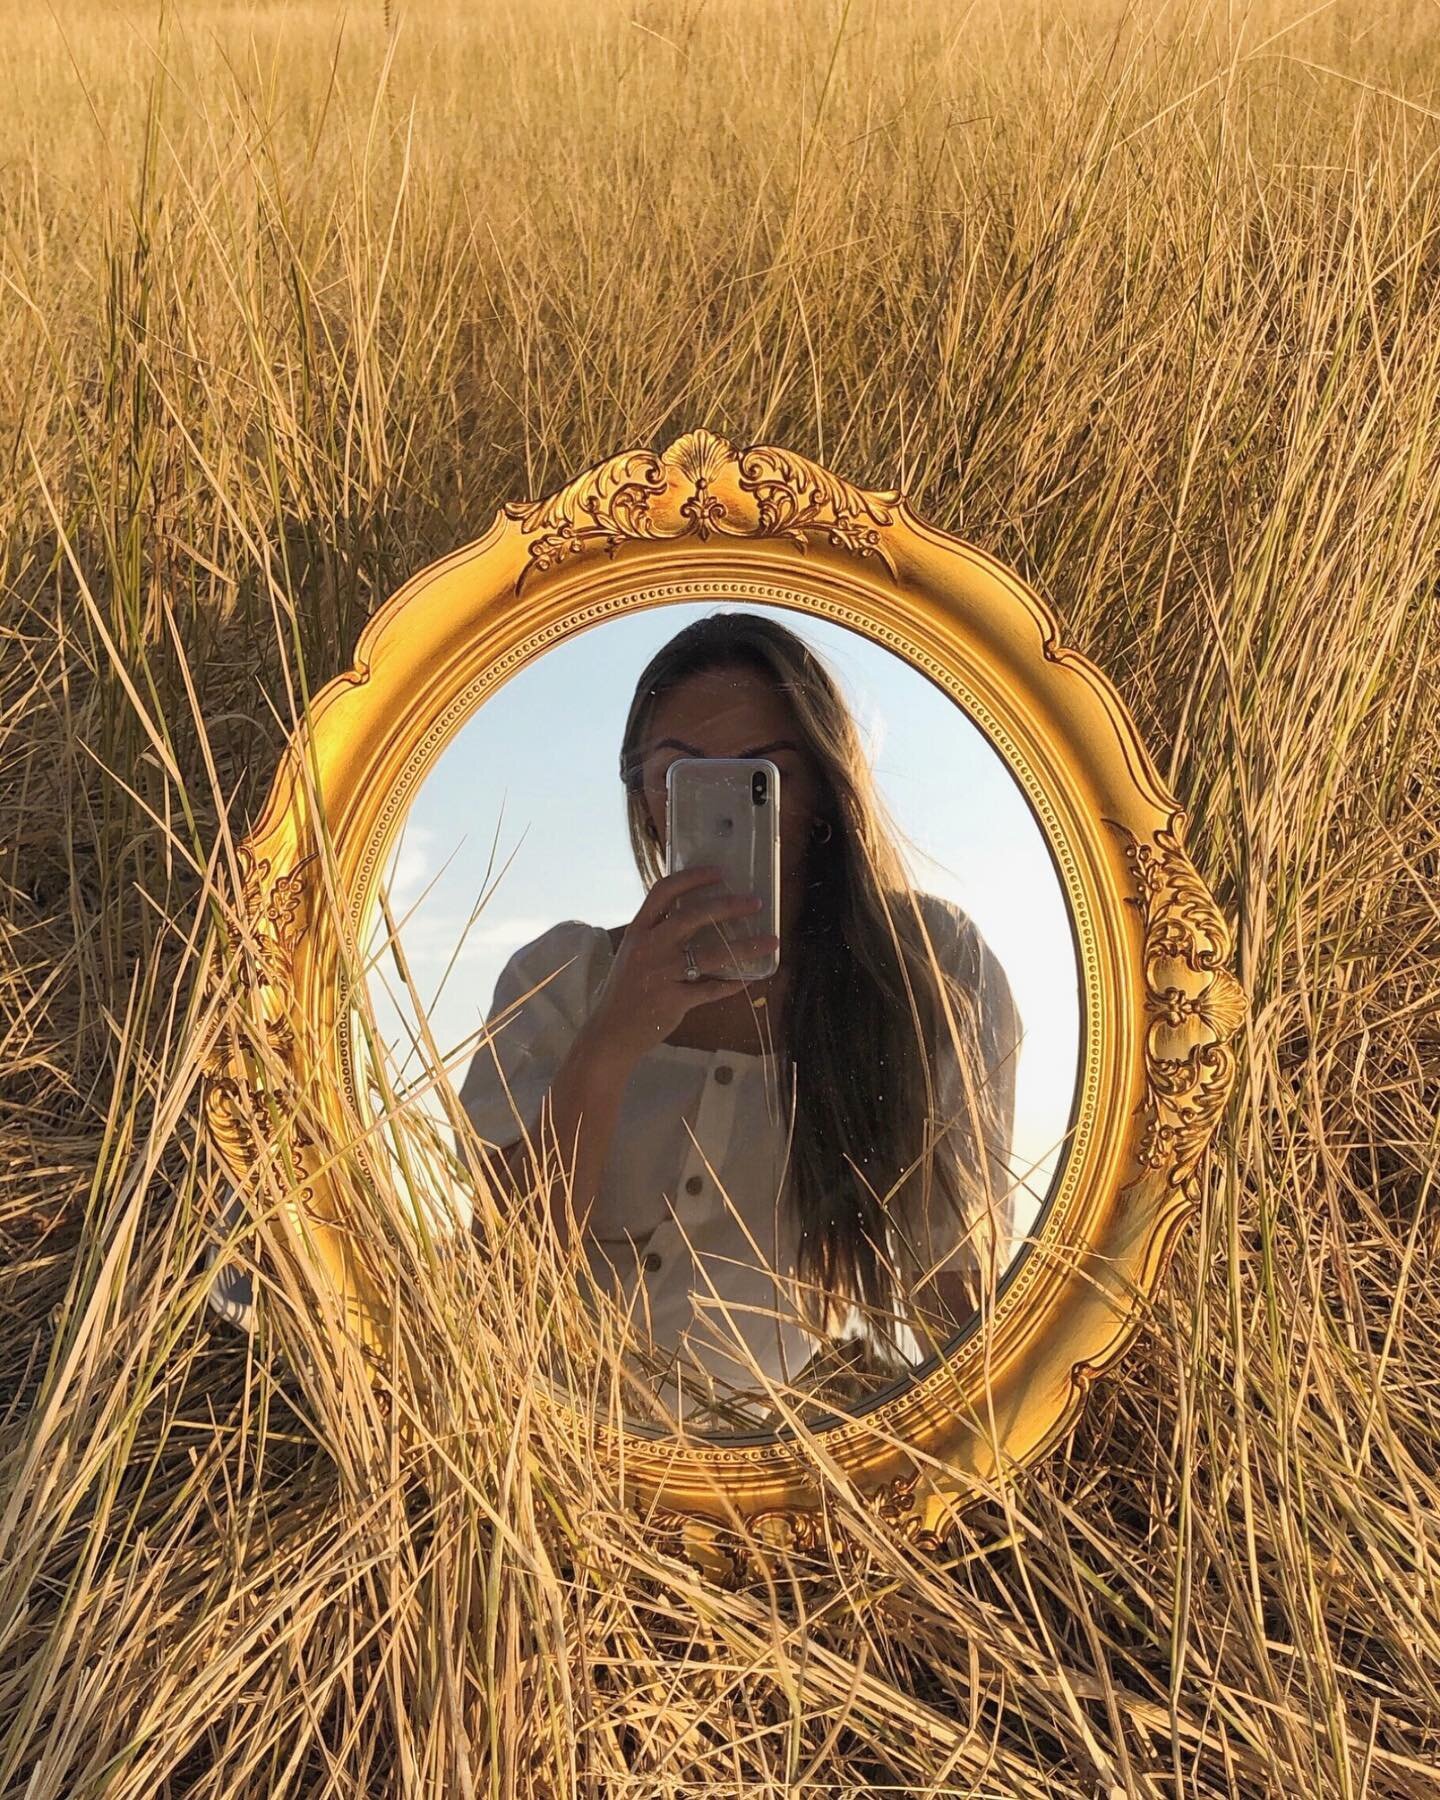 Self portraits in a field ✨@blushmarkofficial #blushmarkstyle #blushmarksquad